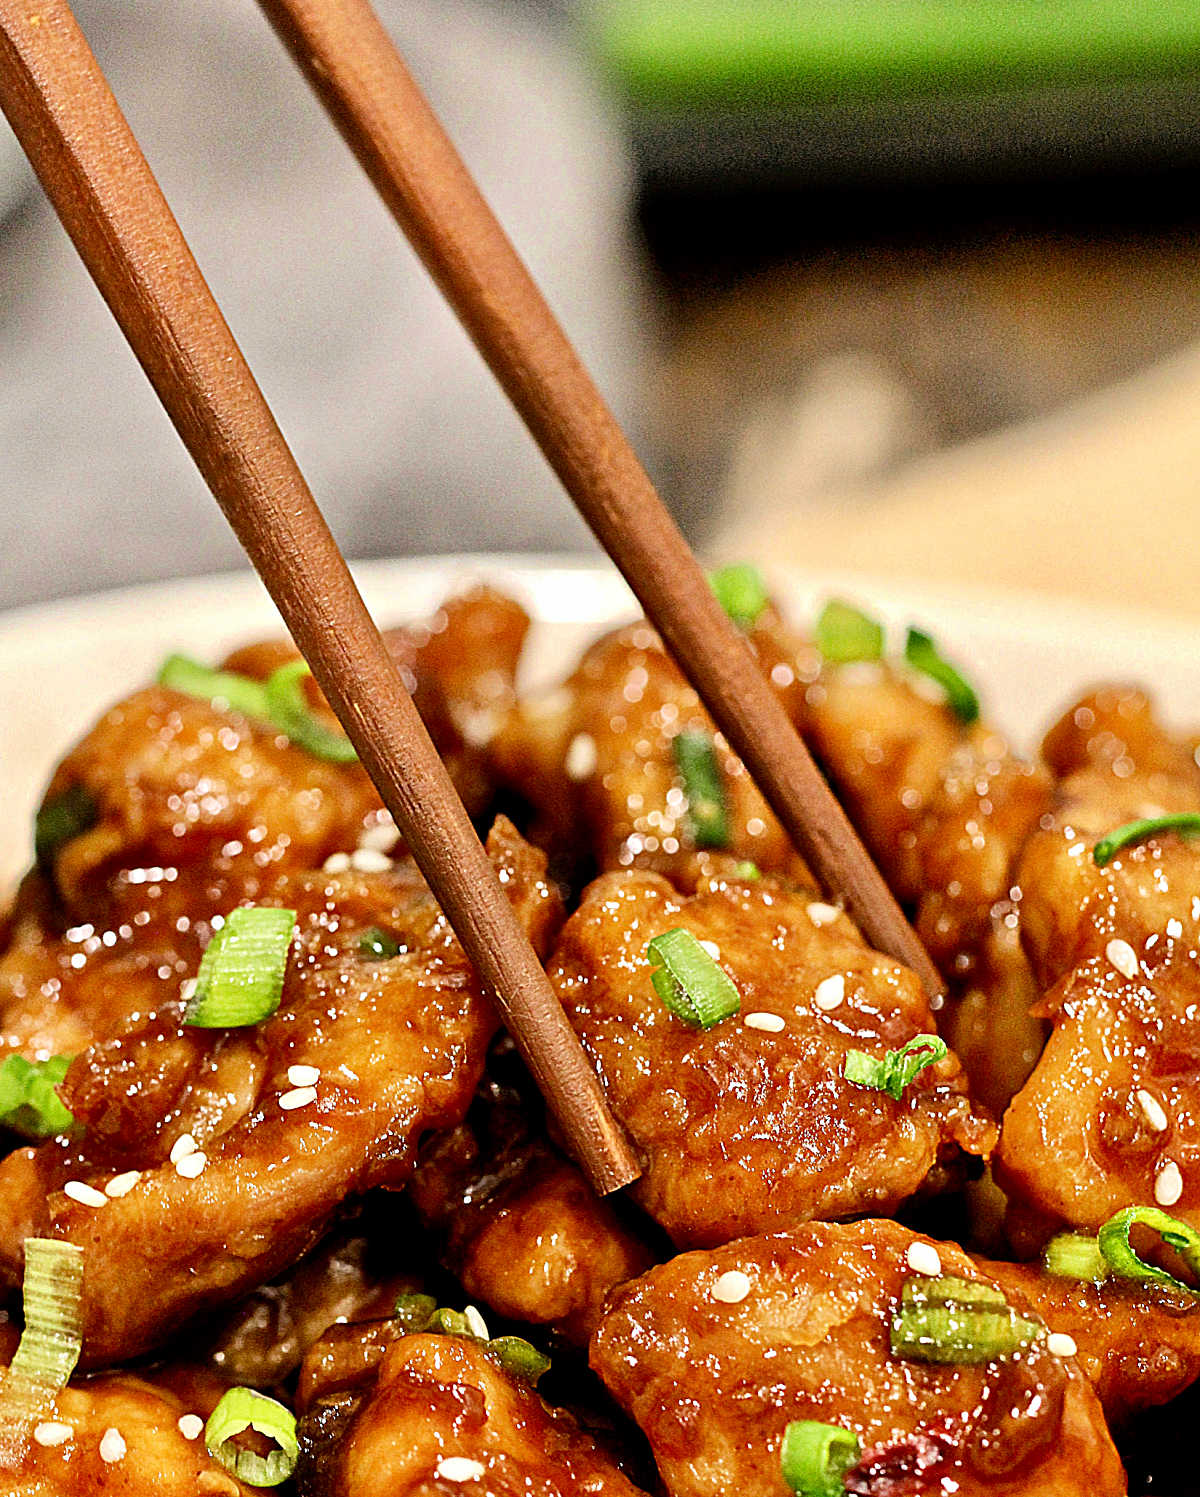 Picking up a piece of Air Fryer General Tso's Chicken with a pair of chopsticks.